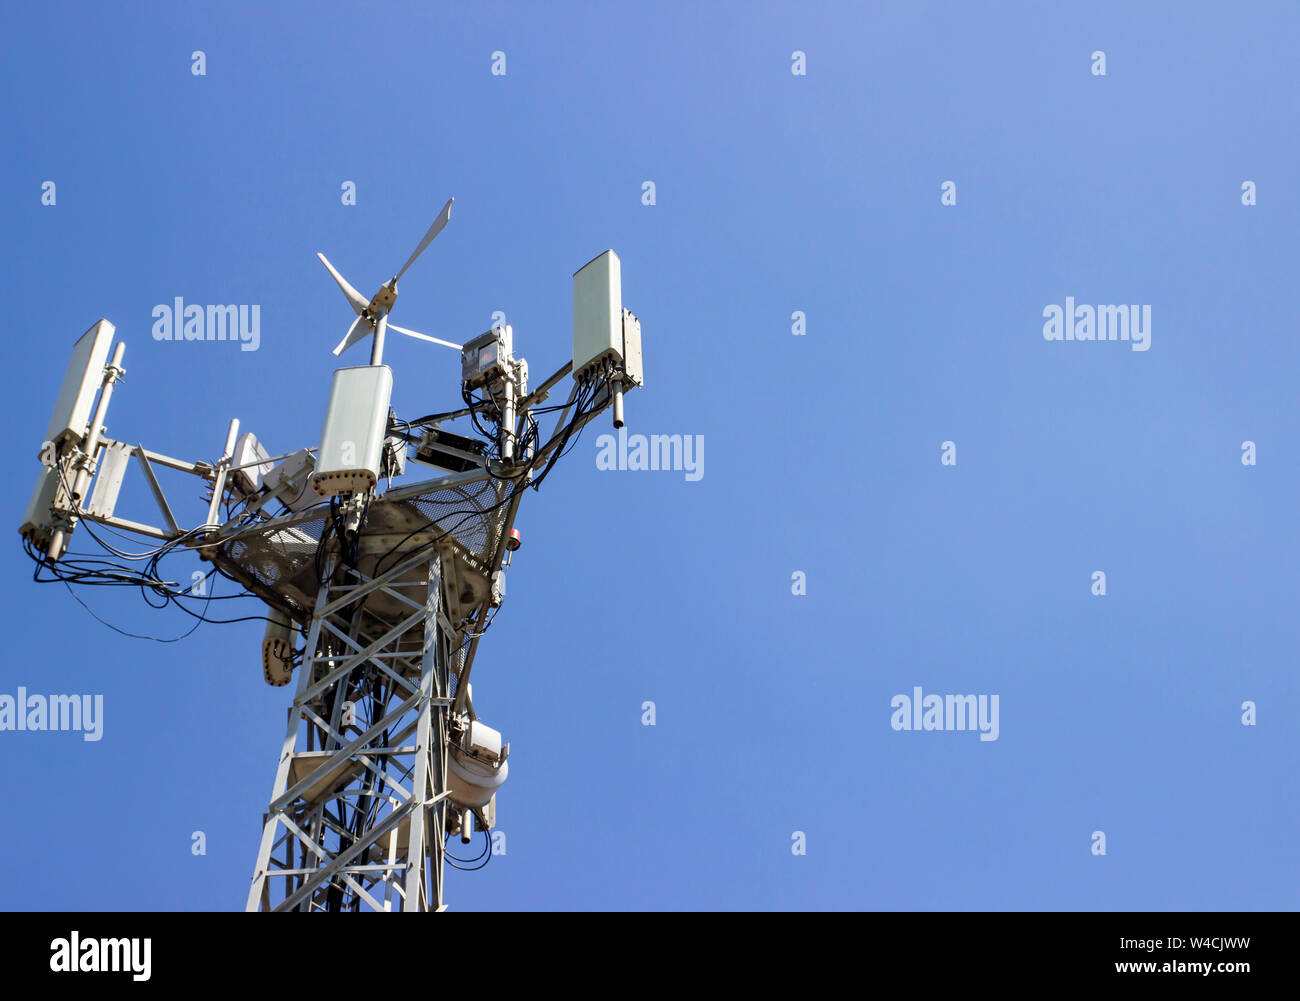 Cellular Base Station or Base Transceiver Station. Telecommunication tower. Wireless Communication Antenna Transmitter. 3G, 4G and 5G Cell Site with Stock Photo